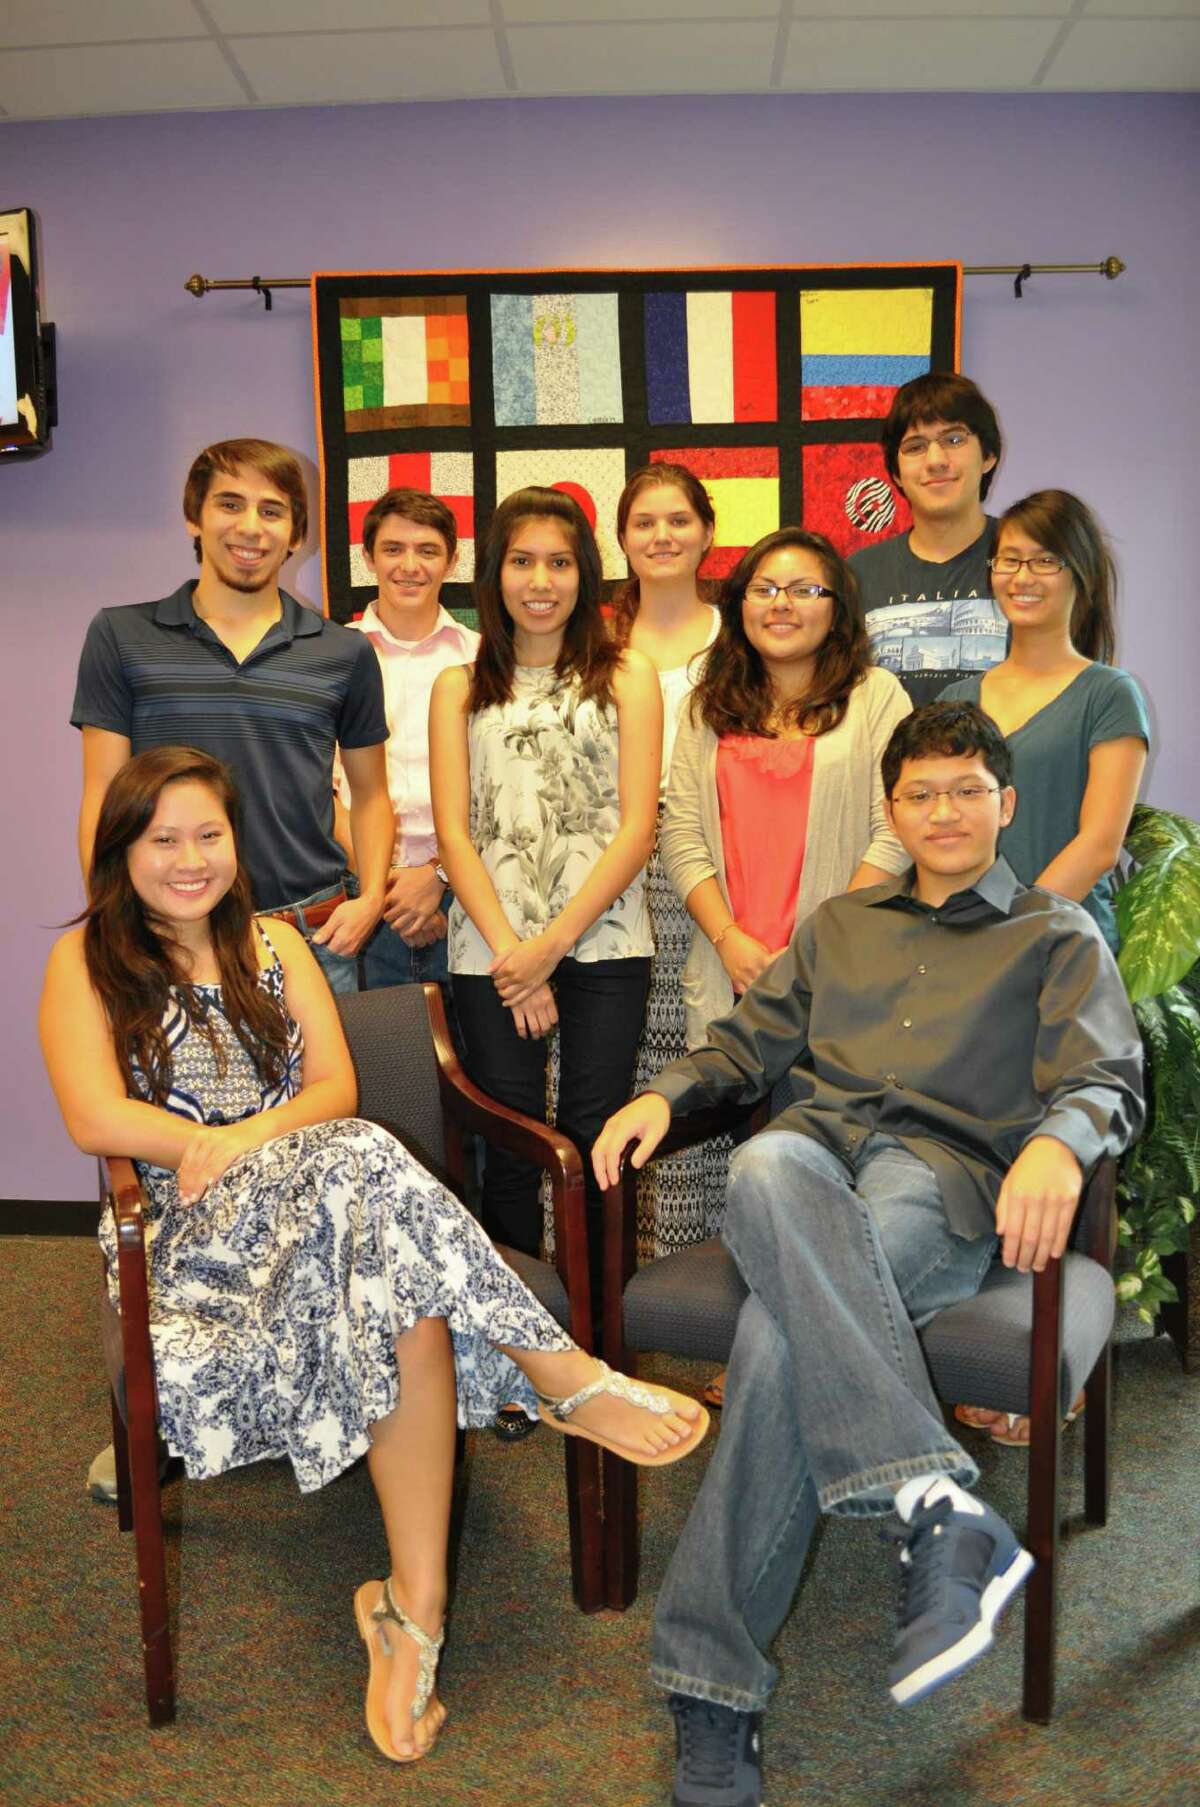 Students are, from left, standing: Adam Kassir, Connor June, Eliza Quintana, Rachel Loving, Yansi Arevalo, Jacob Saenz and Anna Levu; seated: Alyssa Nguyen and David Pham.